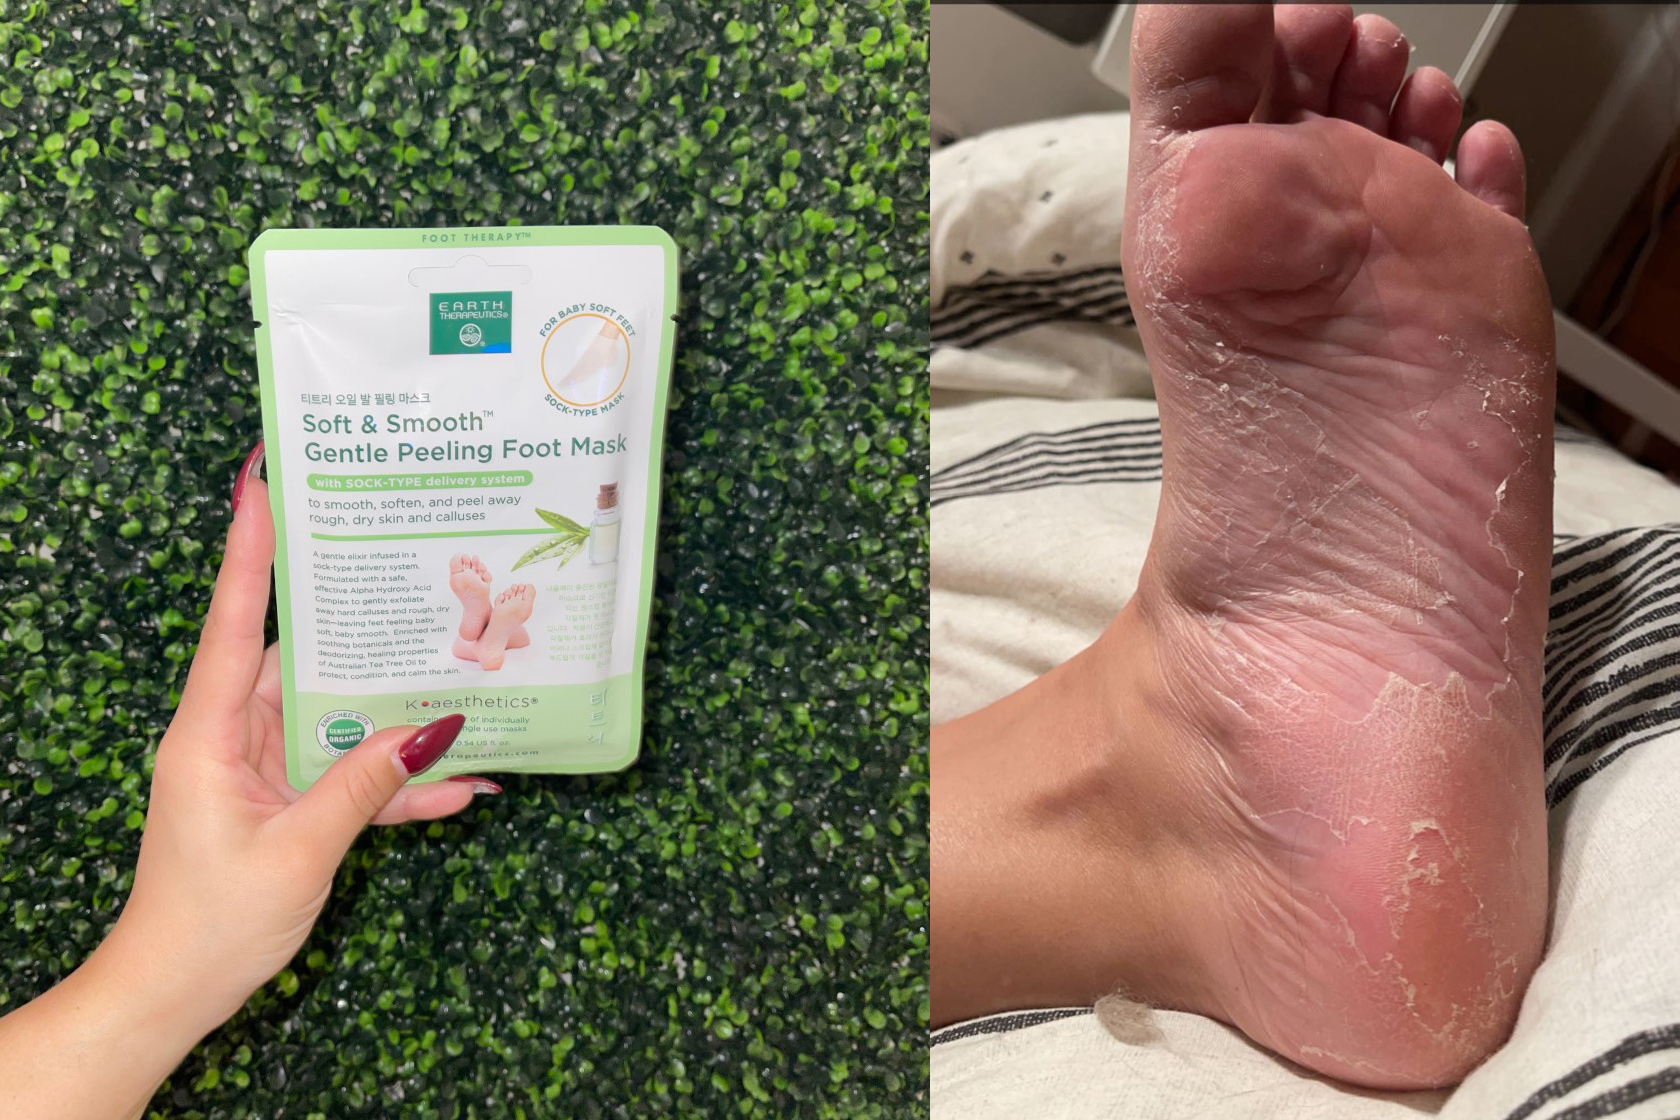 I Tried This 6 Foot Peel And Now I Have The Feet Of A Baby